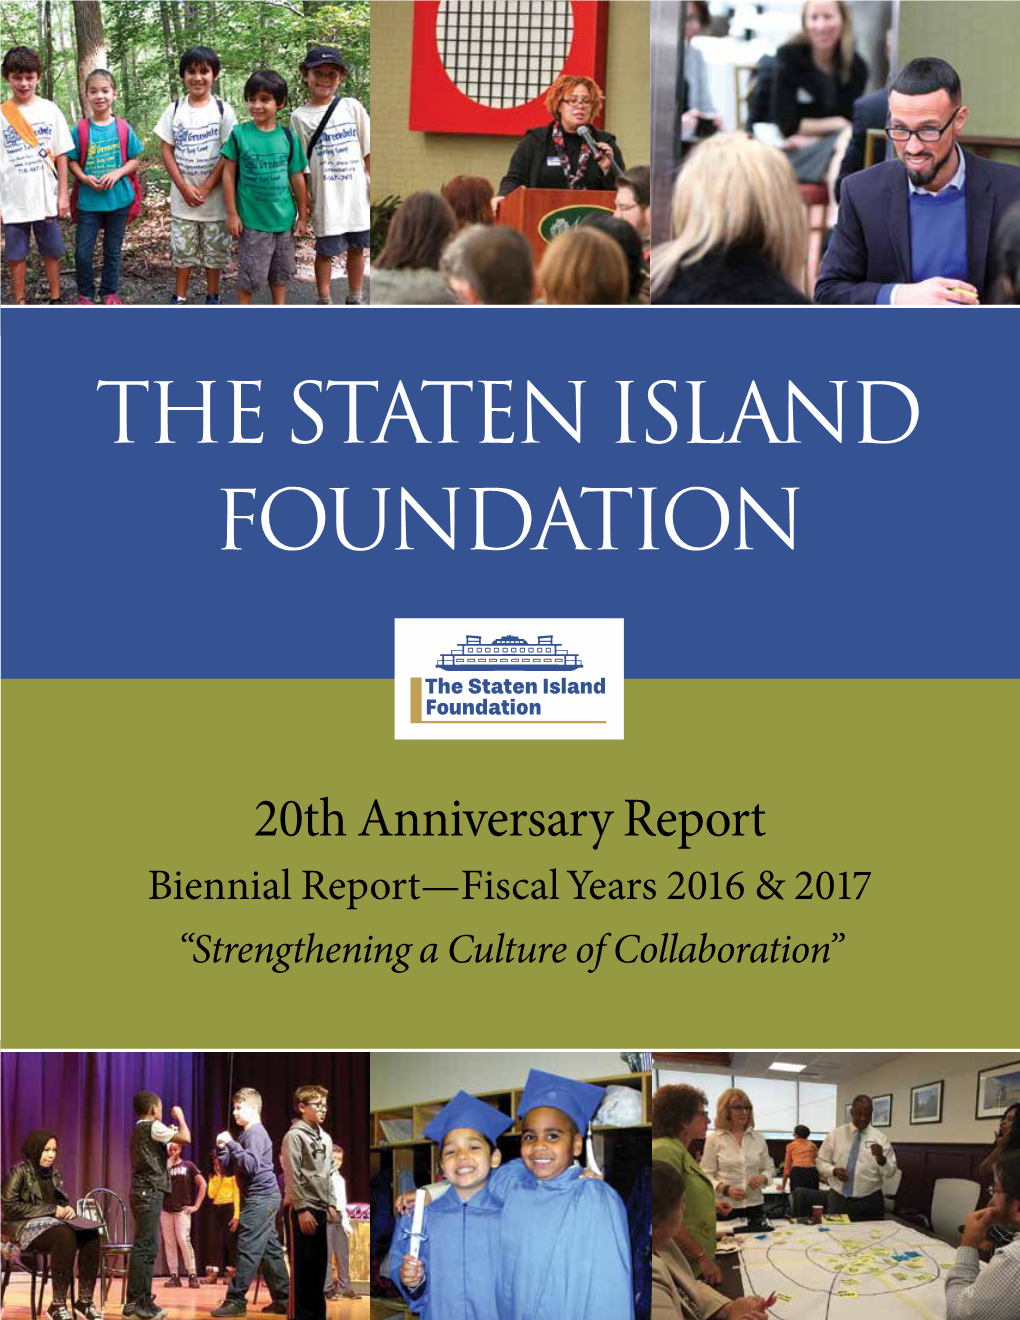 20Th Anniversary Report Biennial Report—Fiscal Years 2016 & 2017 “Strengthening a Culture of Collaboration” the Staten Island Foundation